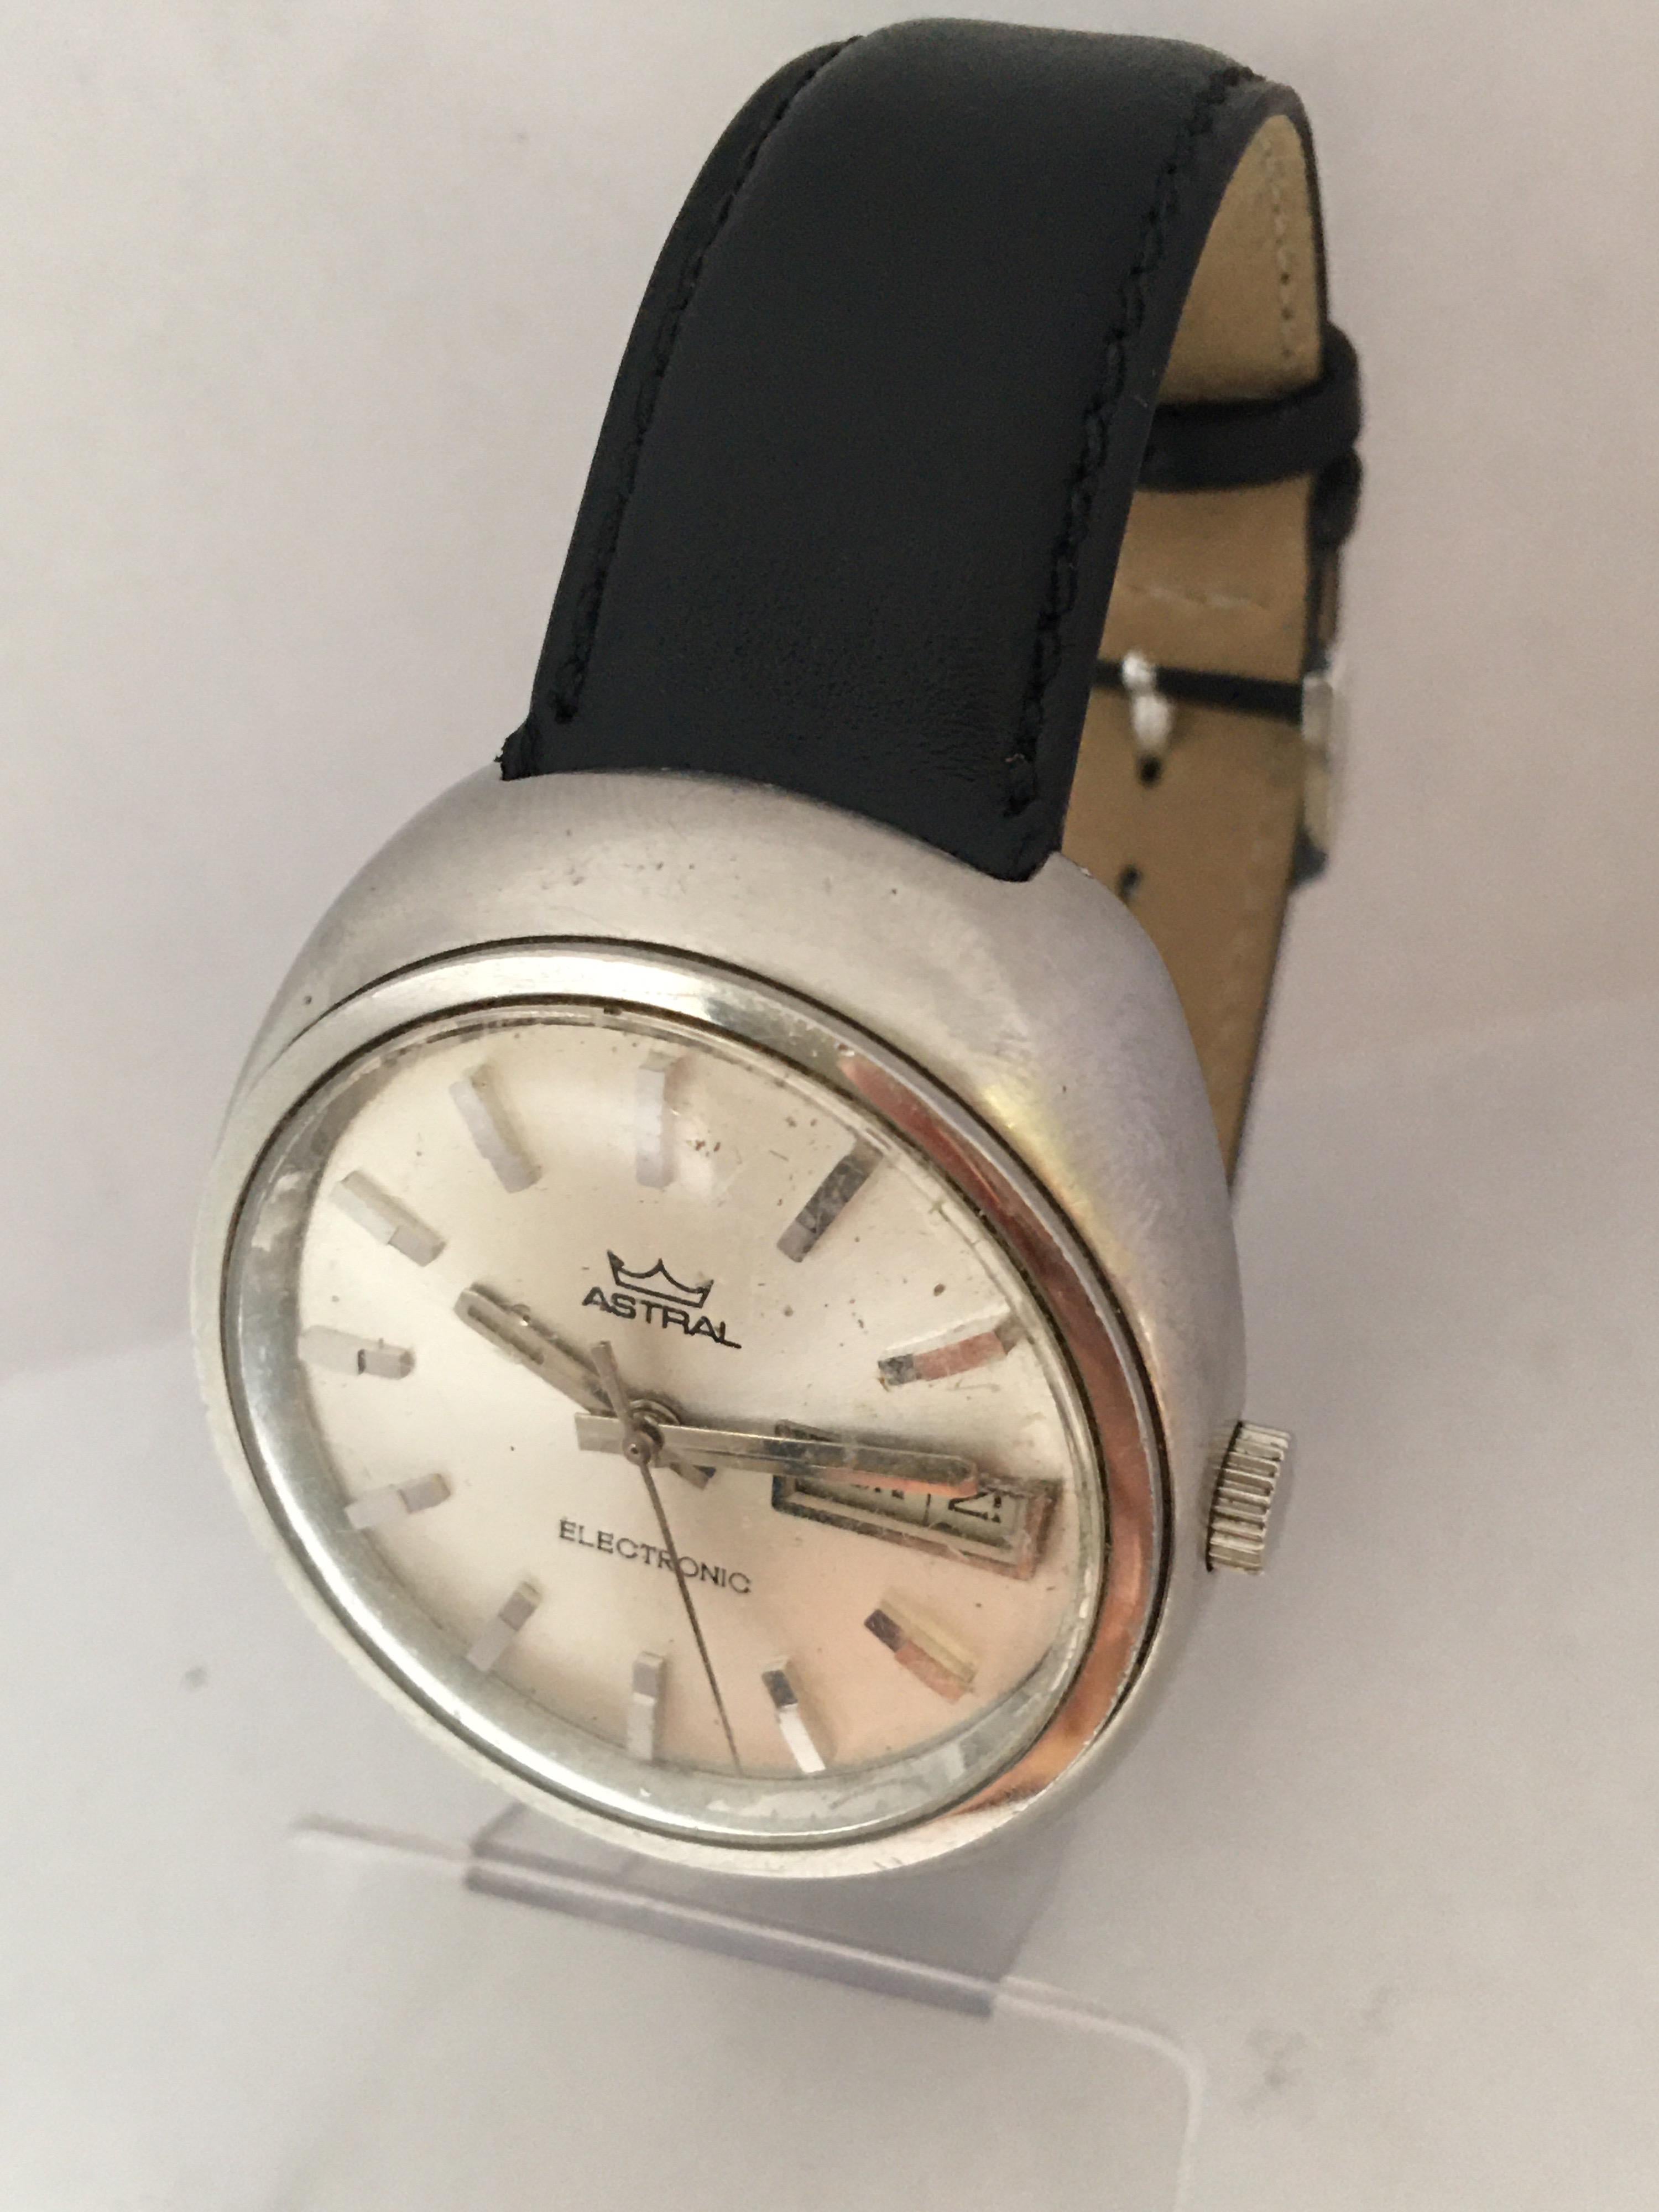 Rare Vintage 1970s ASTRAL Steel Electronic Watch For Sale 4